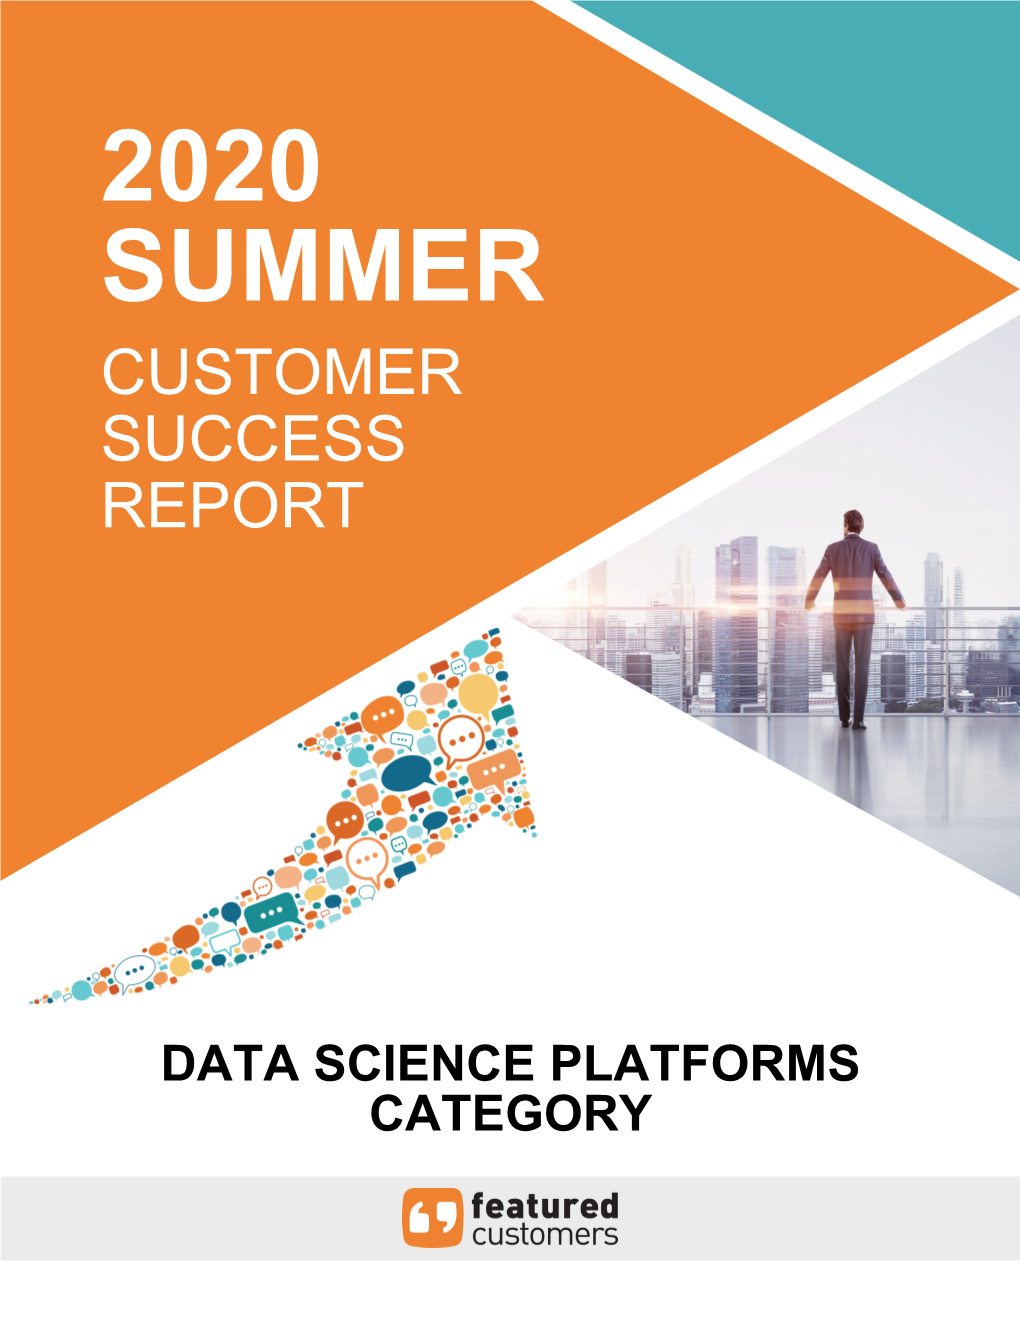 Data Science Platforms Category Data Science Platforms Overview